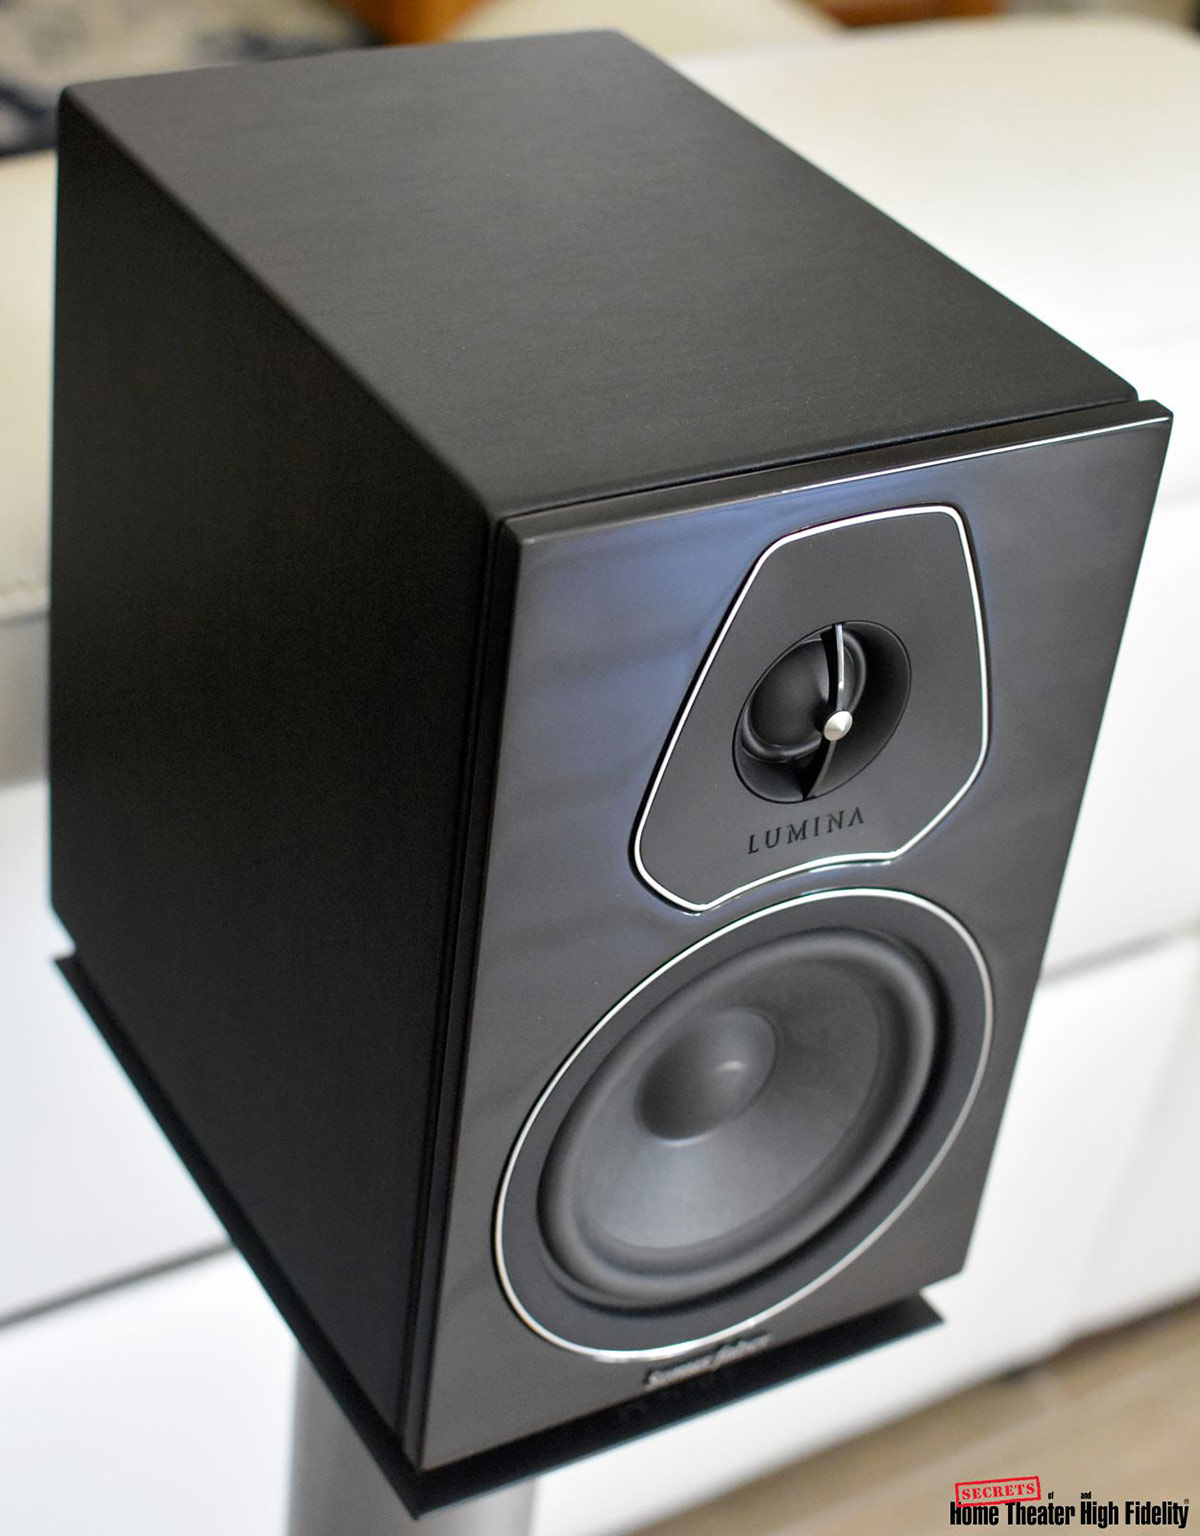 Sonus faber Lumina II single speaker showing faux-leather finish on the top and sides